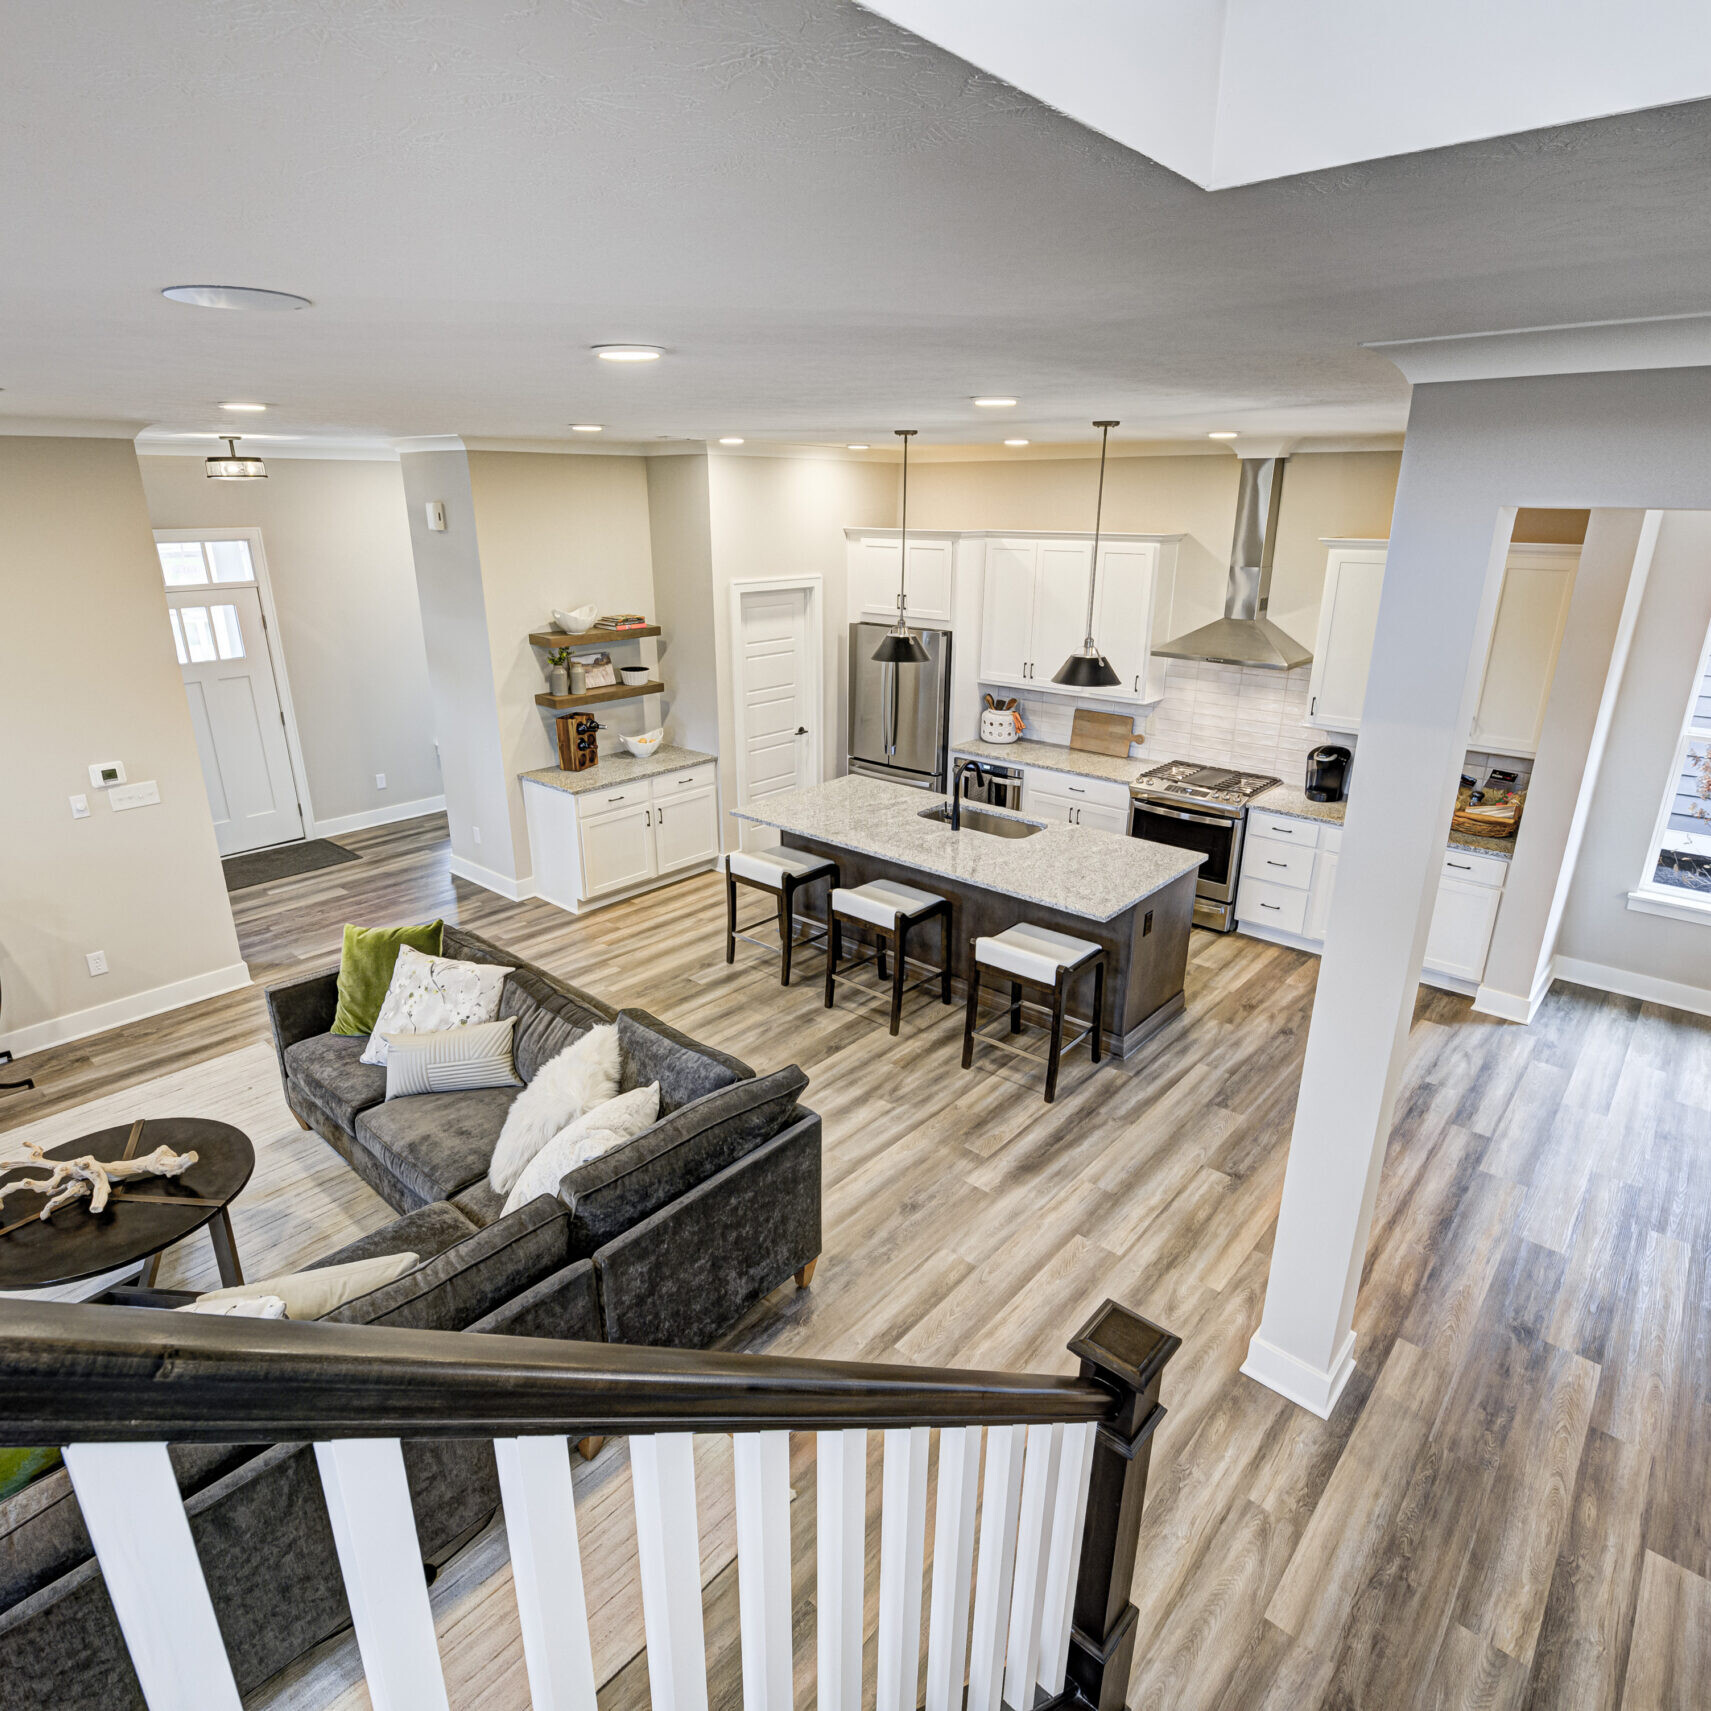 A view of the living room and kitchen in a custom home builder Fishers Indiana.